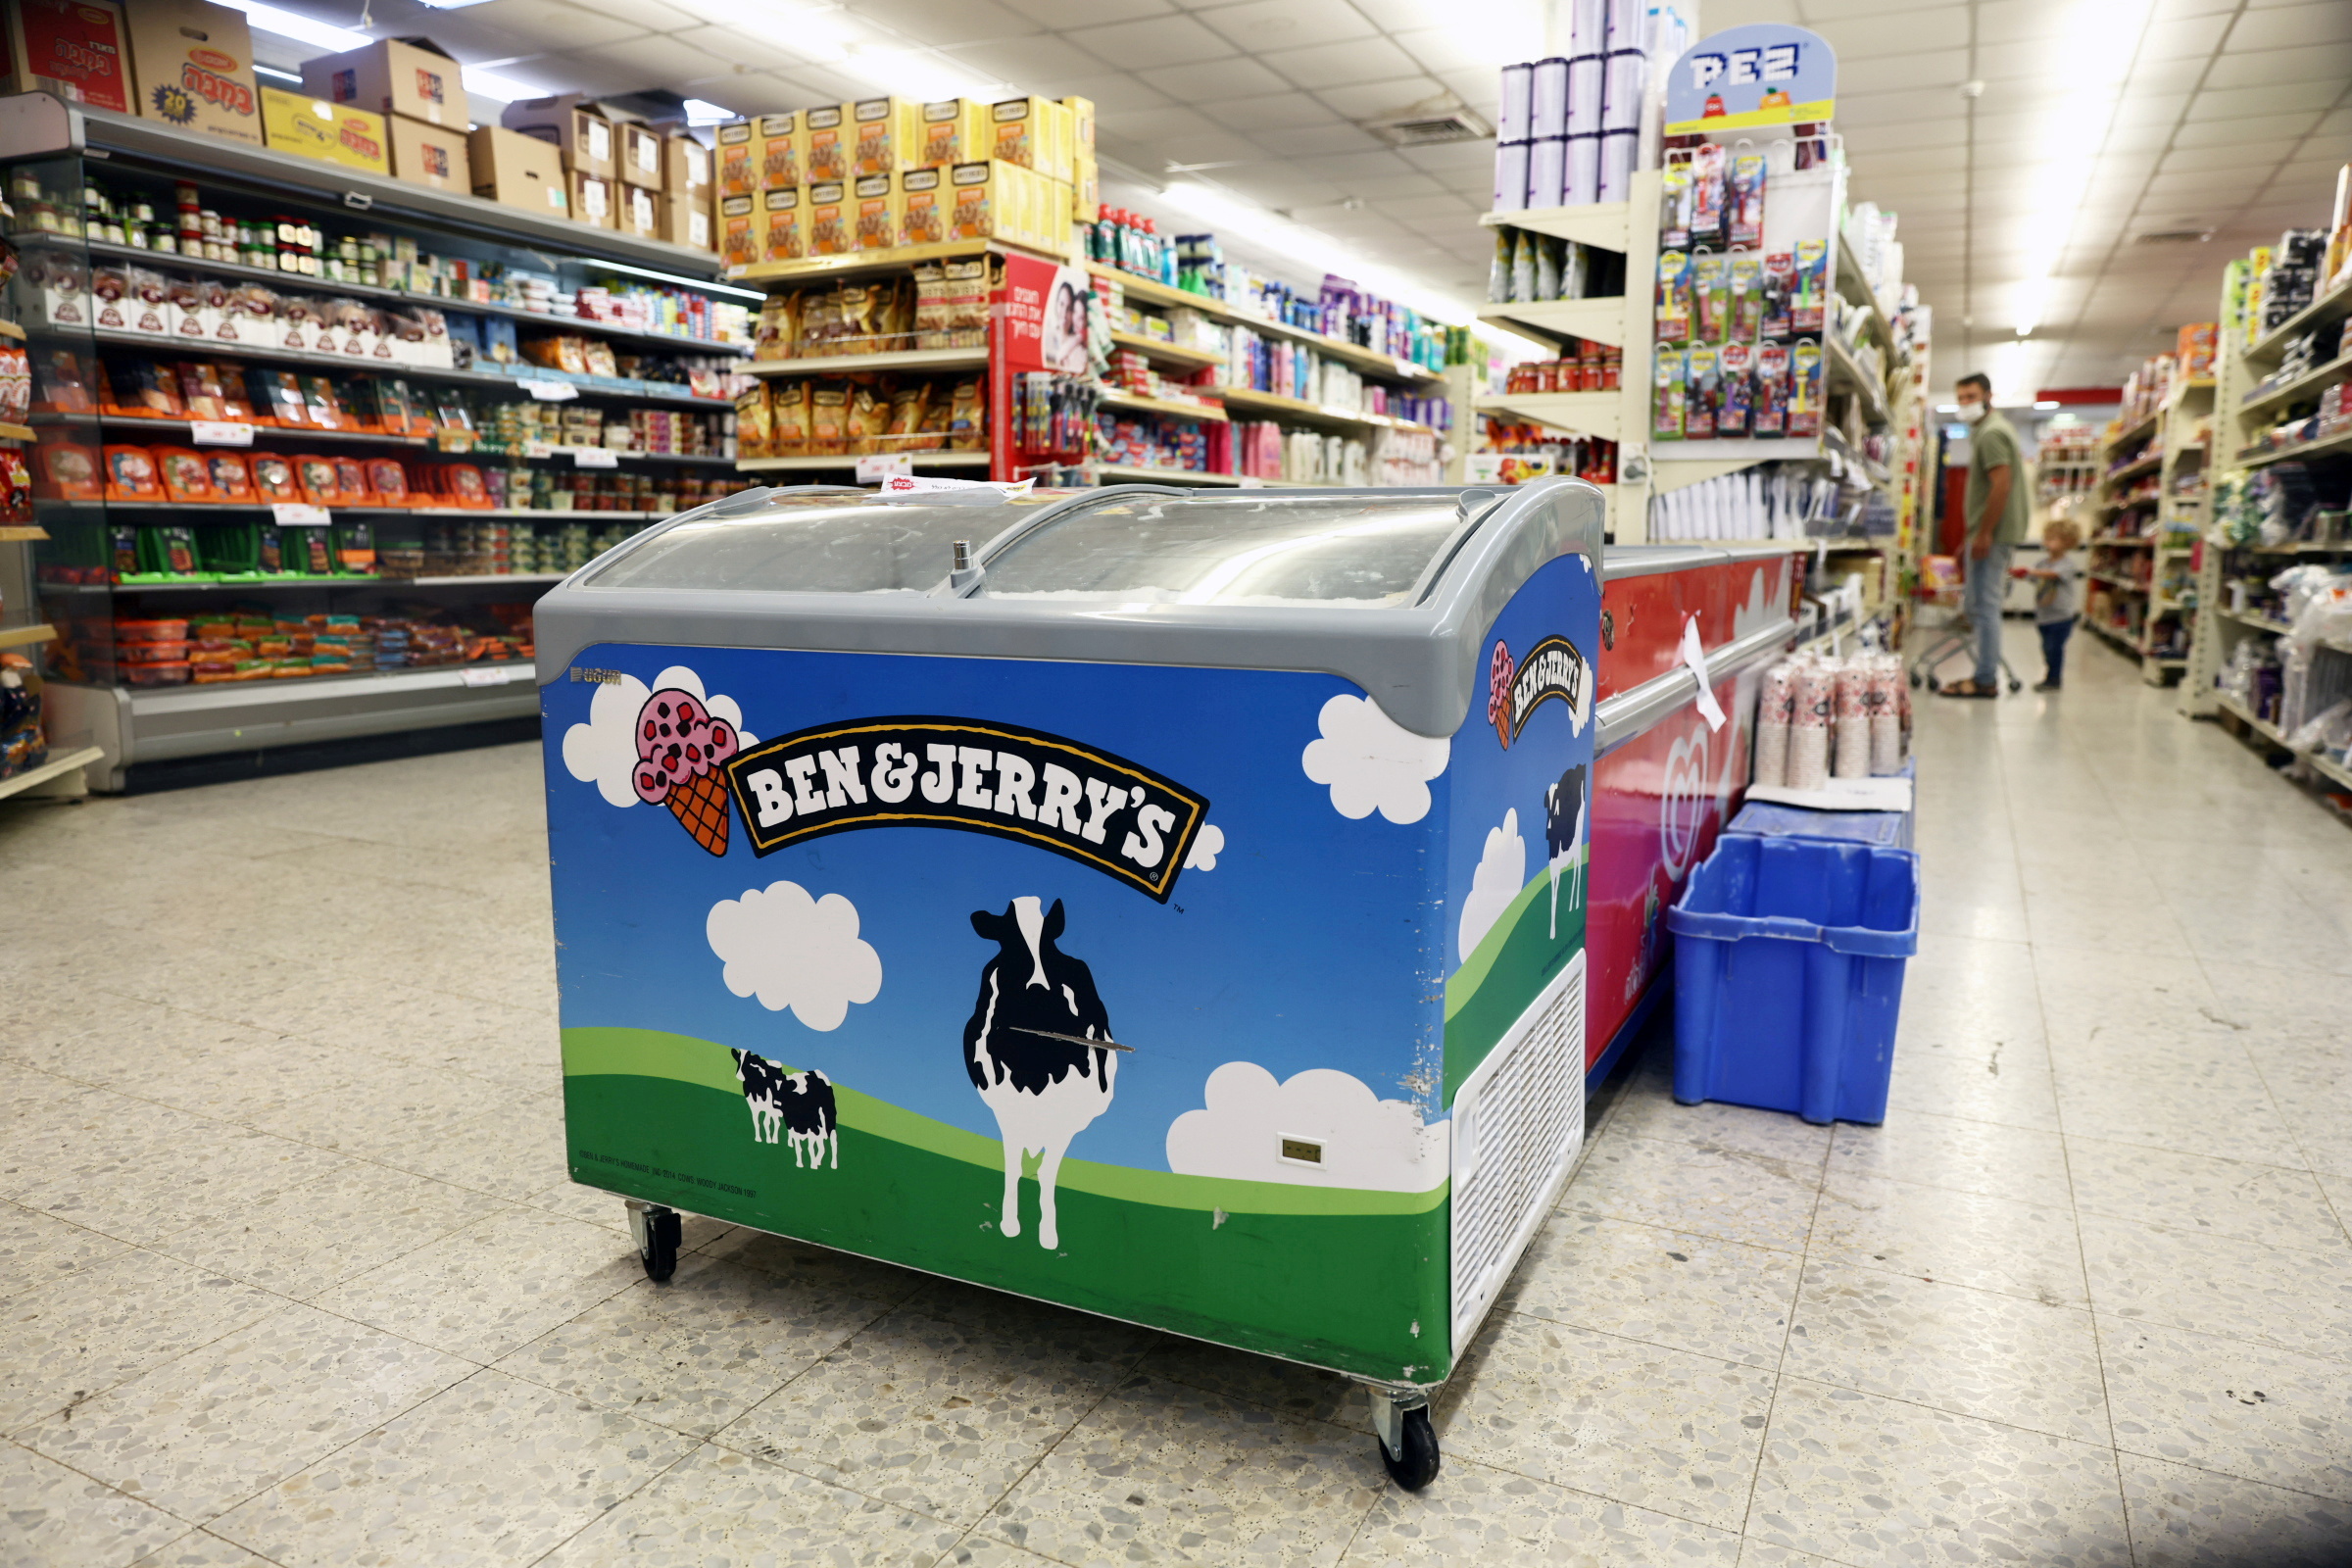 A refrigerator bearing the Ben & Jerry's logo is seen at a food store in the Jewish settlement of Efrat in the Israeli-occupied West Bank July 20, 2021. REUTERS/Ronen Zvulun